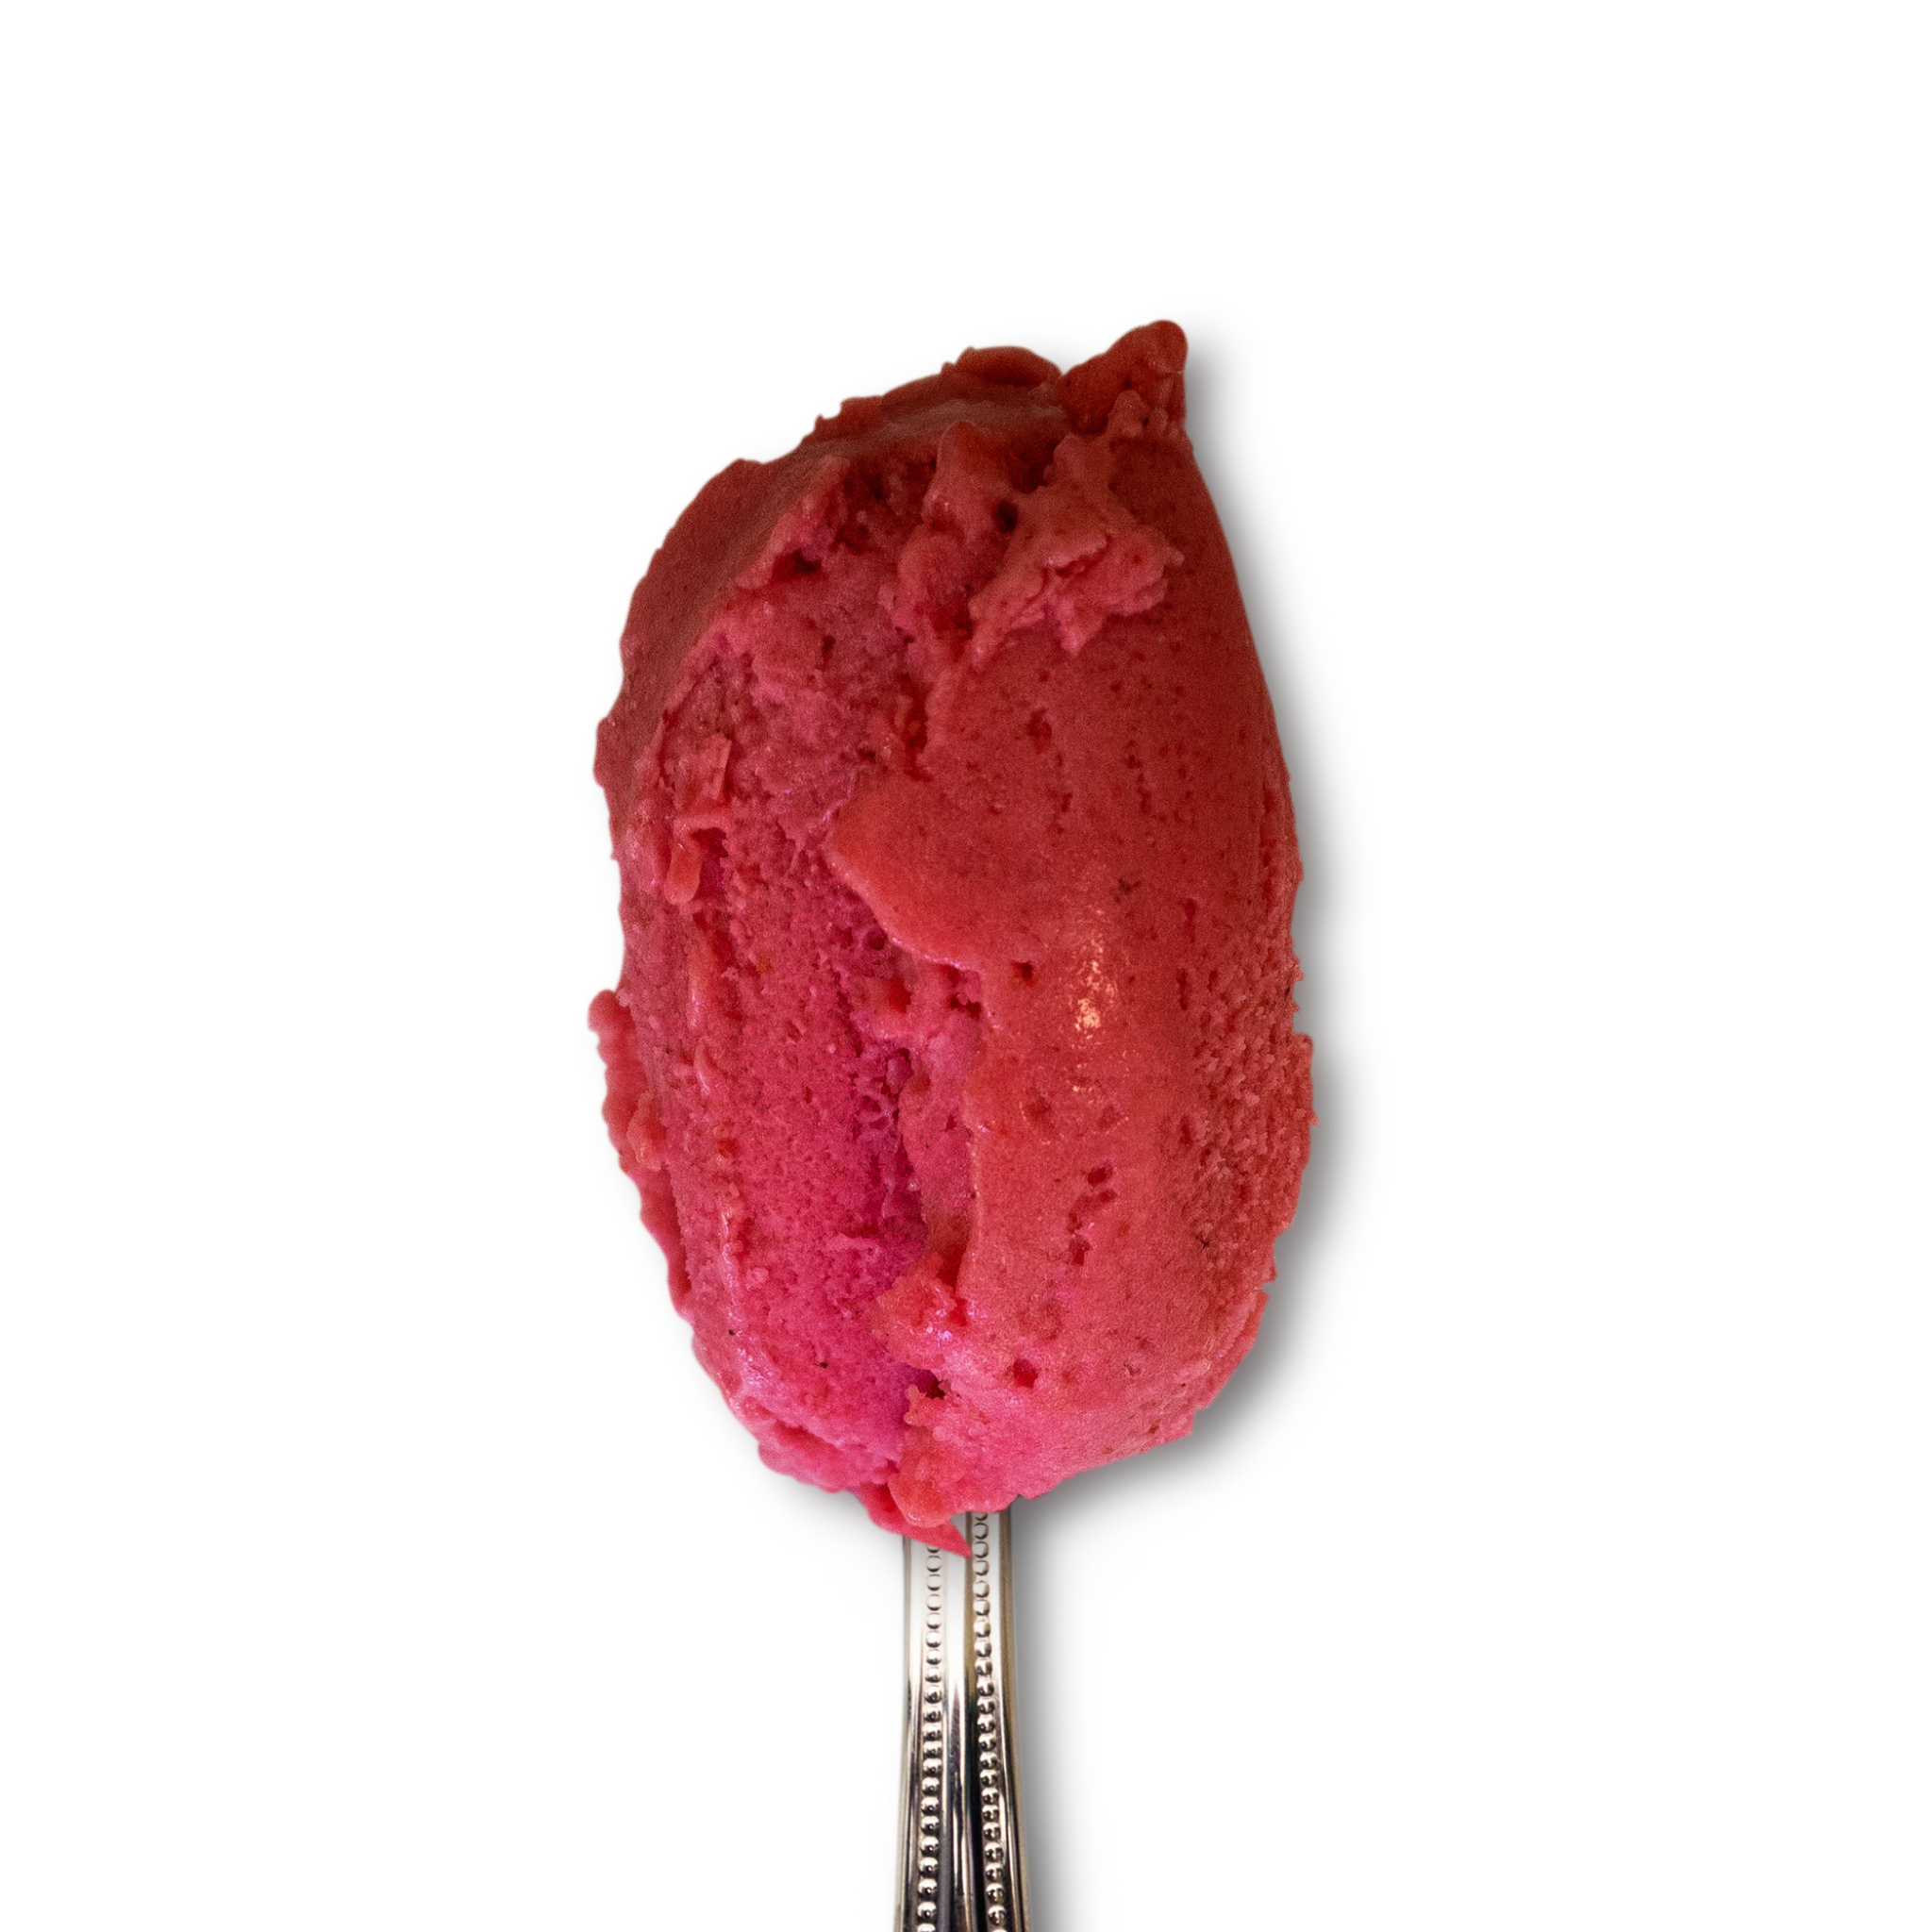 Ice Cream Cherry, Red Sorbet, Scoop, Black Slate Background Stock Photo,  Picture and Royalty Free Image. Image 53006493.